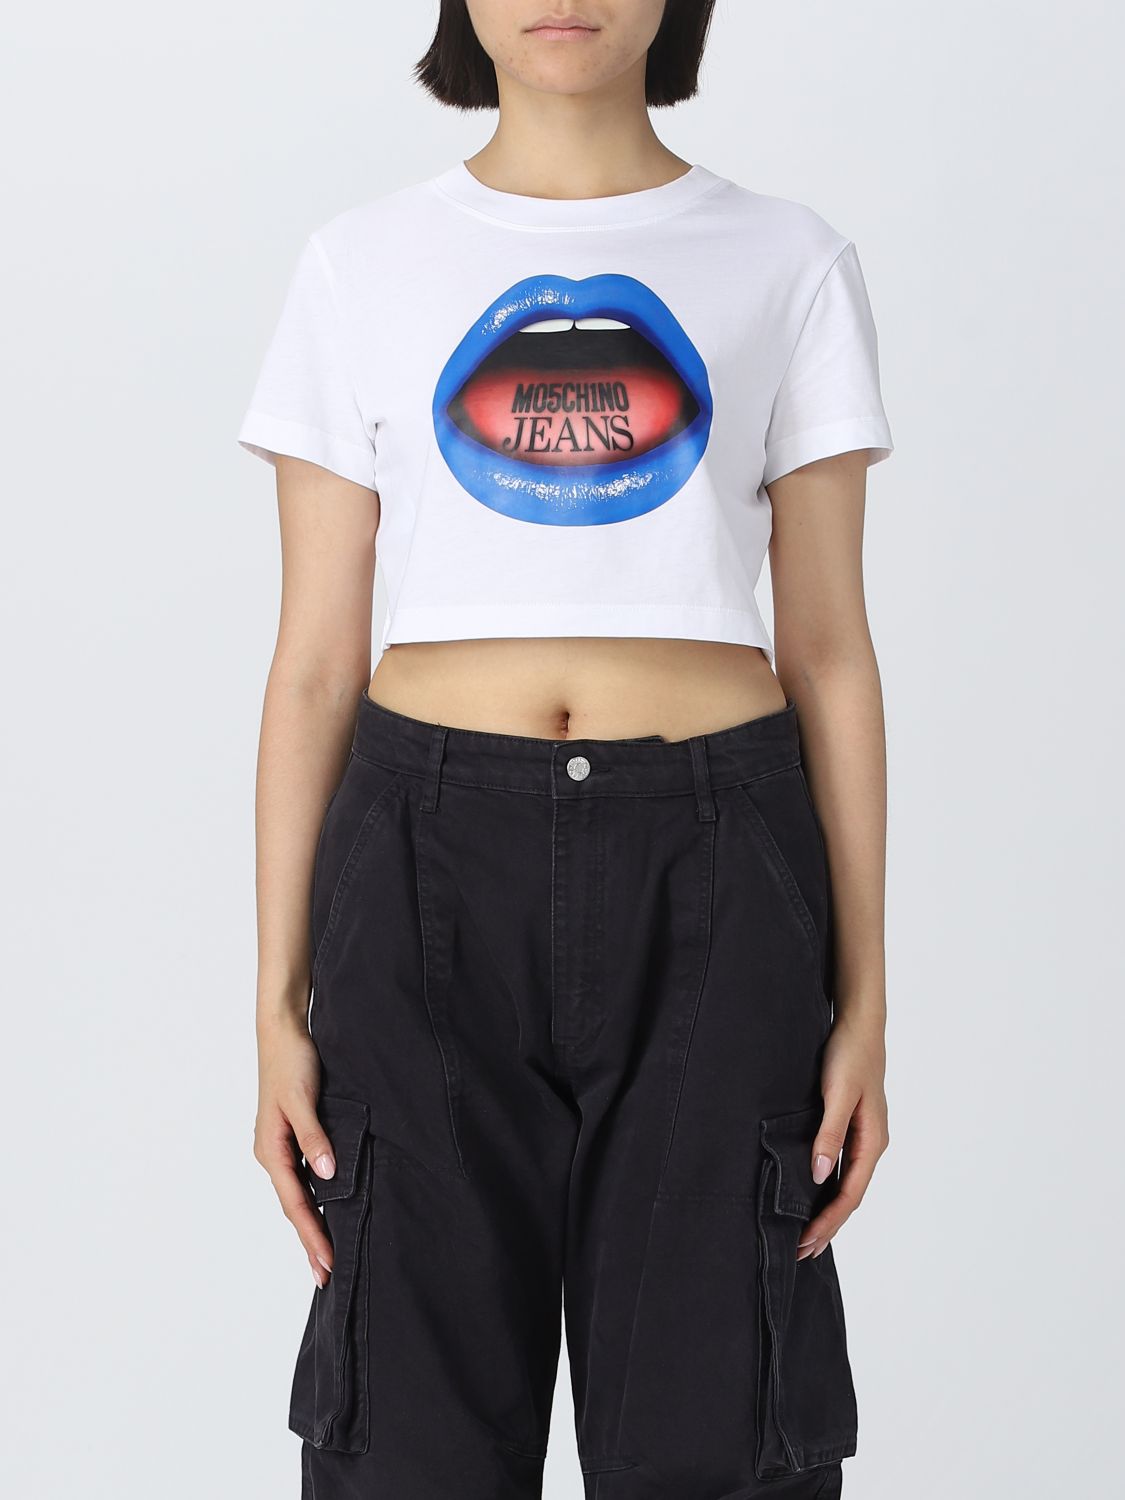 Moschino Jeans T-Shirt MOSCHINO JEANS Woman colour White